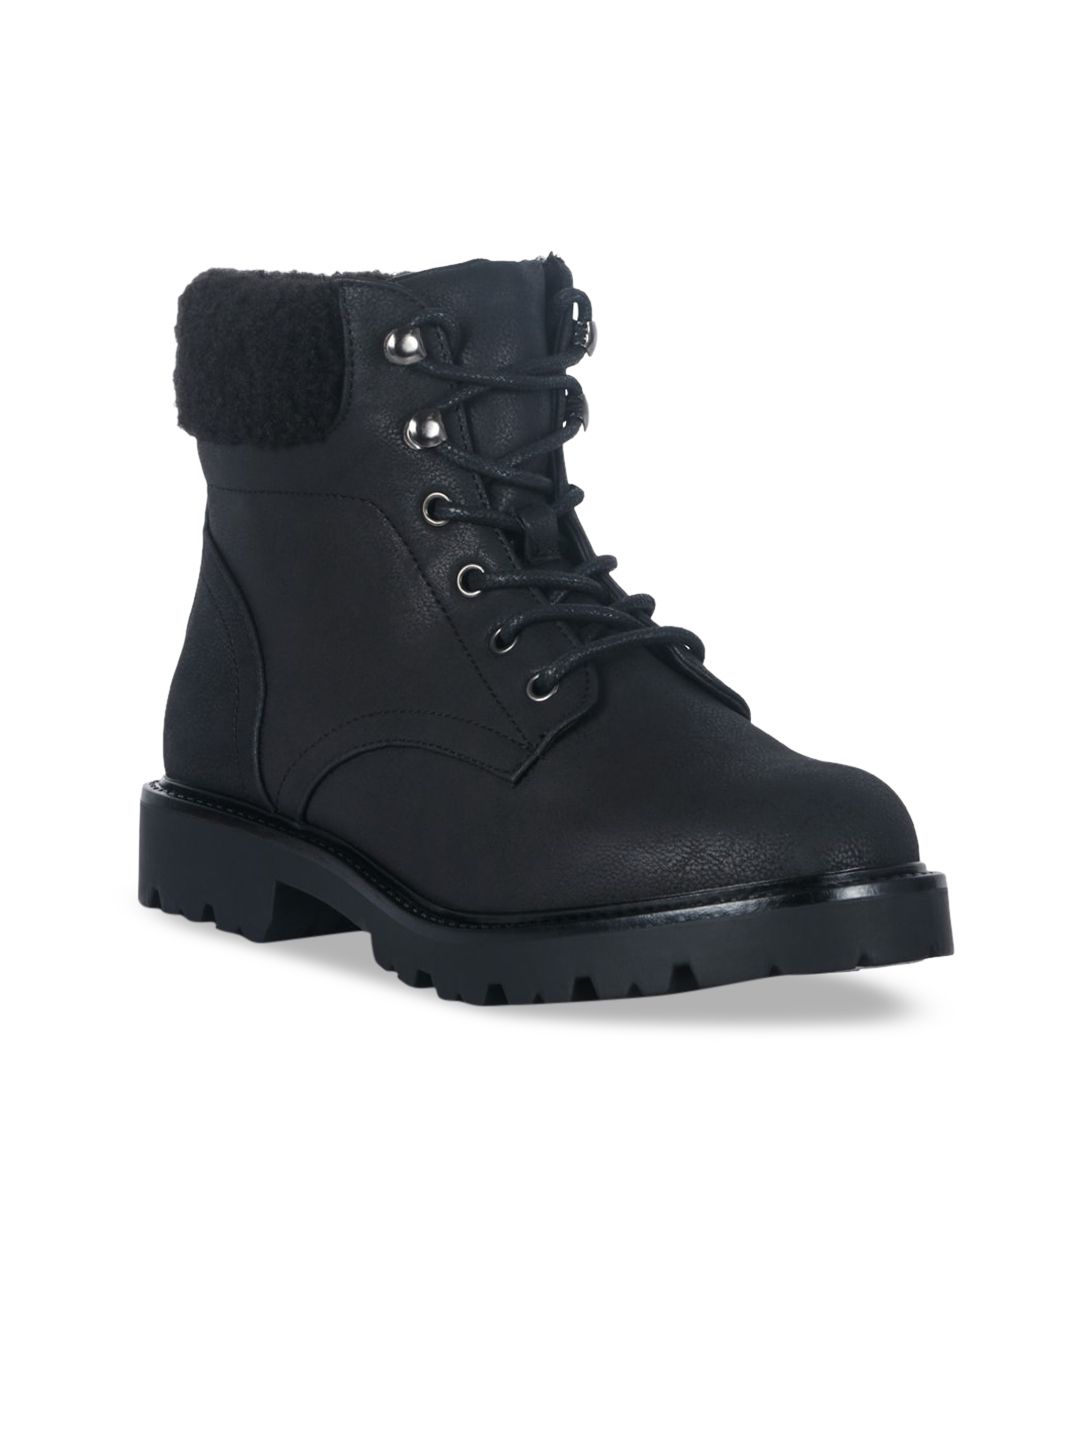 London Rag Women Black Solid Casual Mid-Top Block Heeled Biker Boots with Fur Collar Price in India